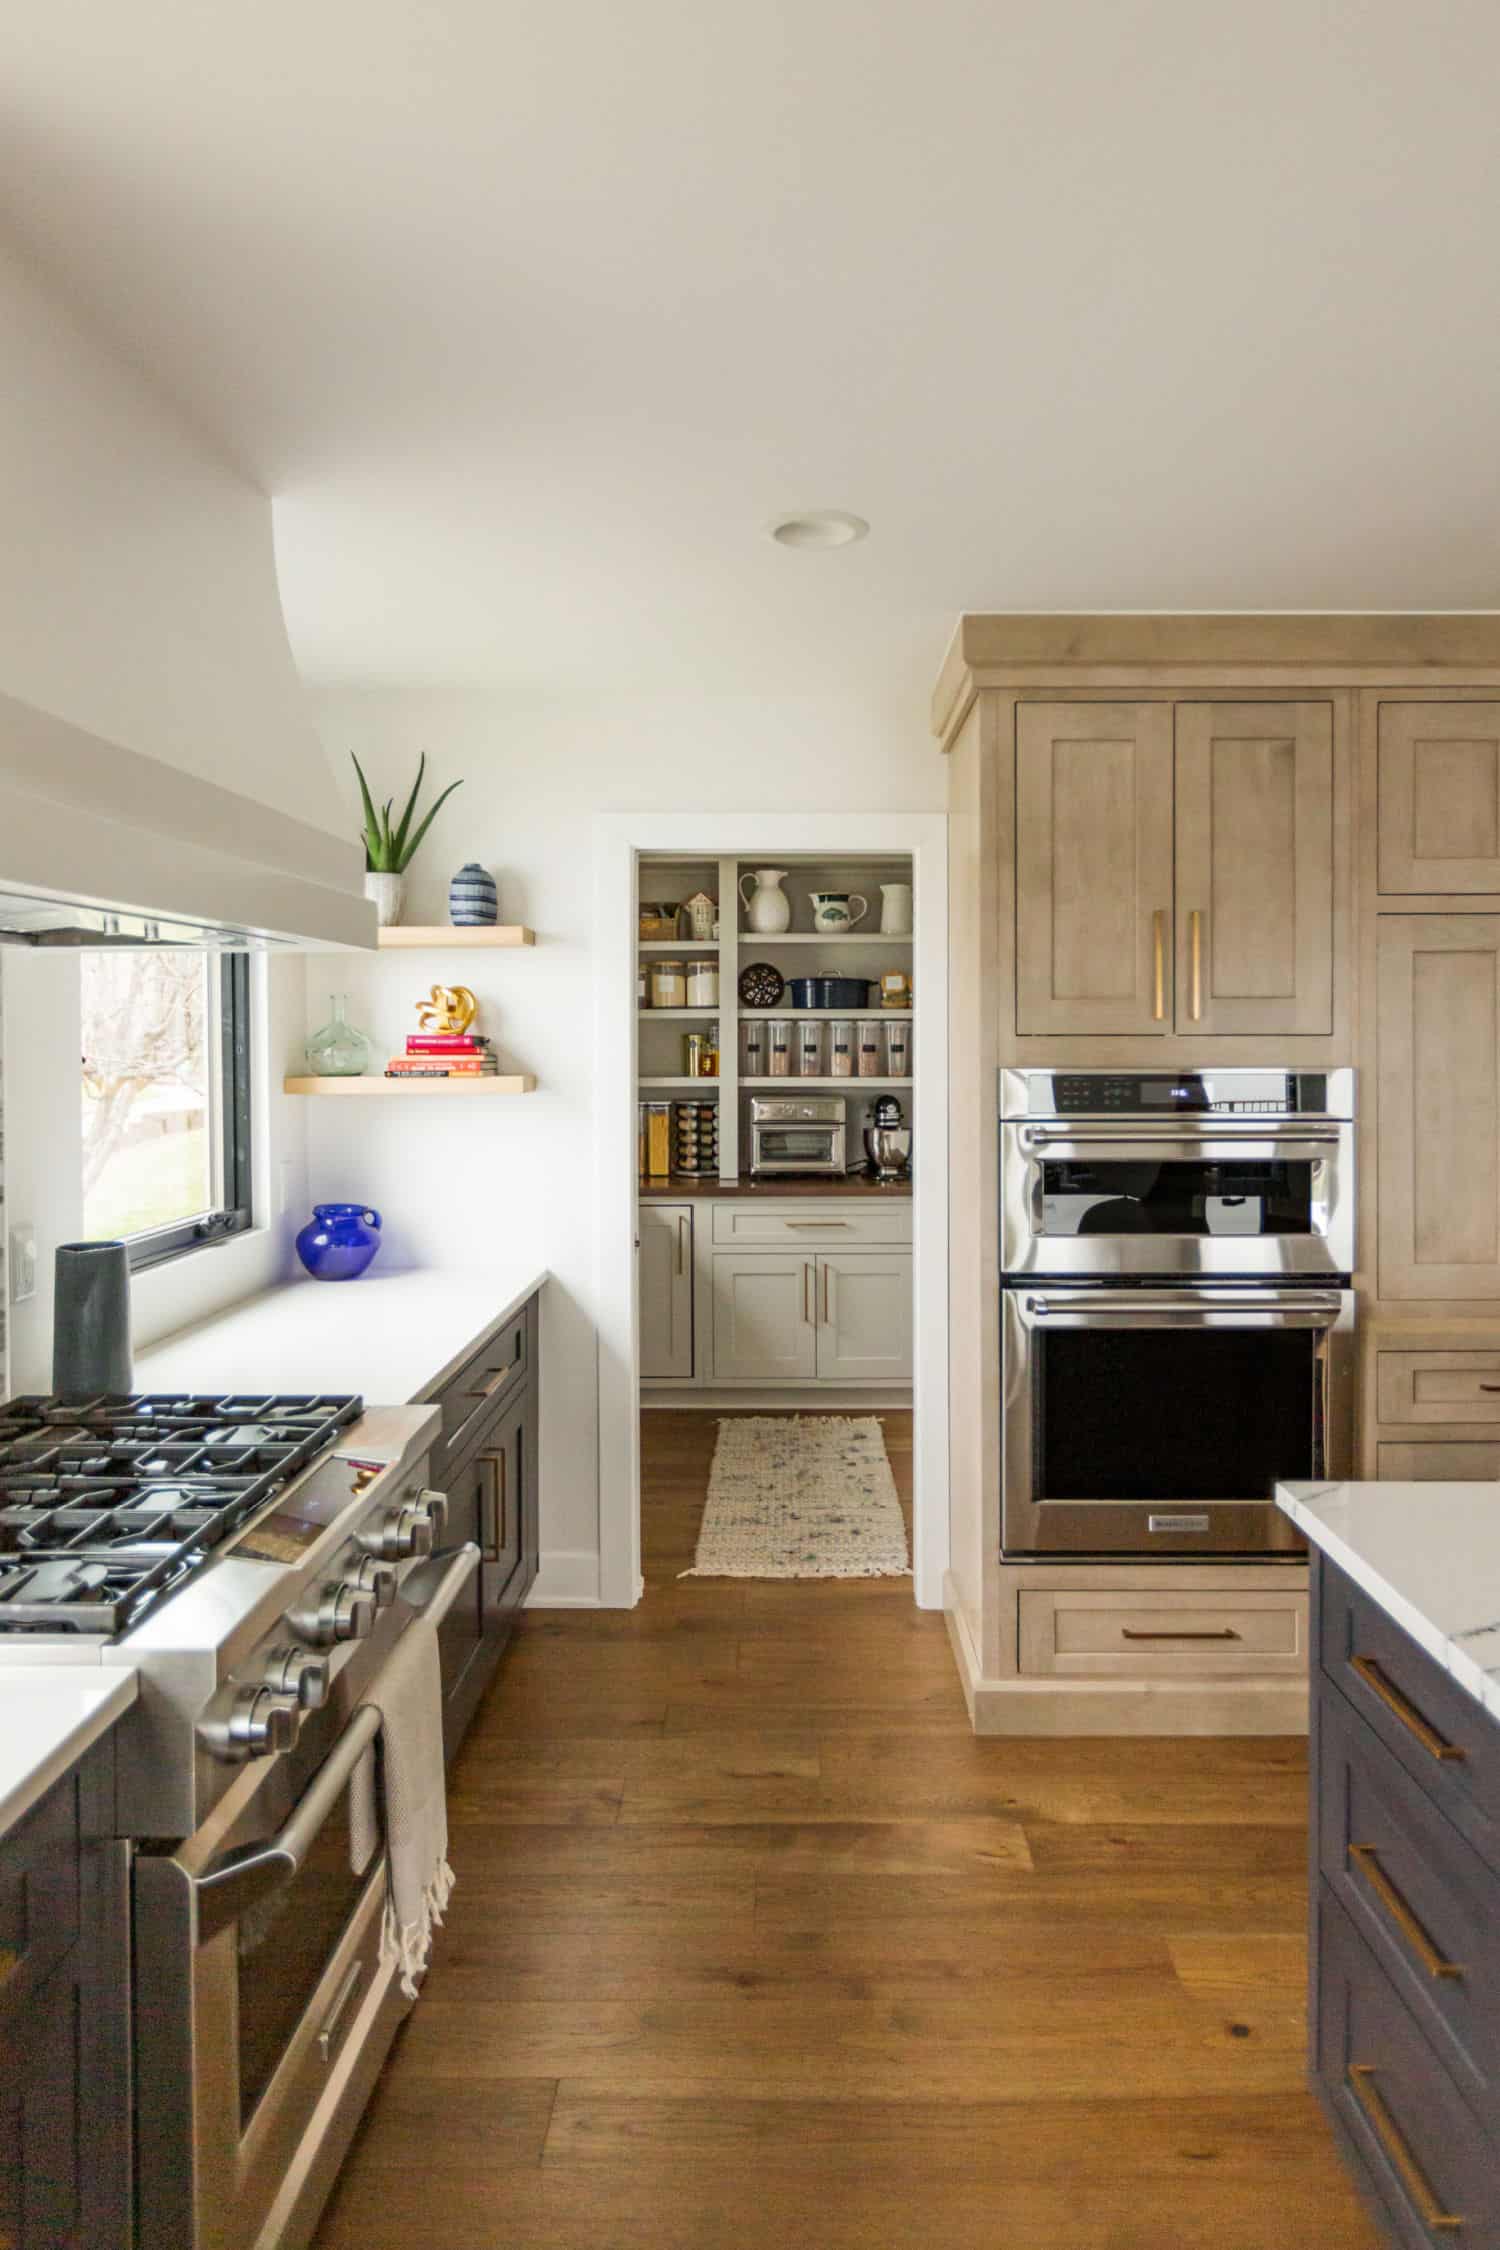 Nicholas Design Build | A remodeled kitchen with wood floors and a stove.